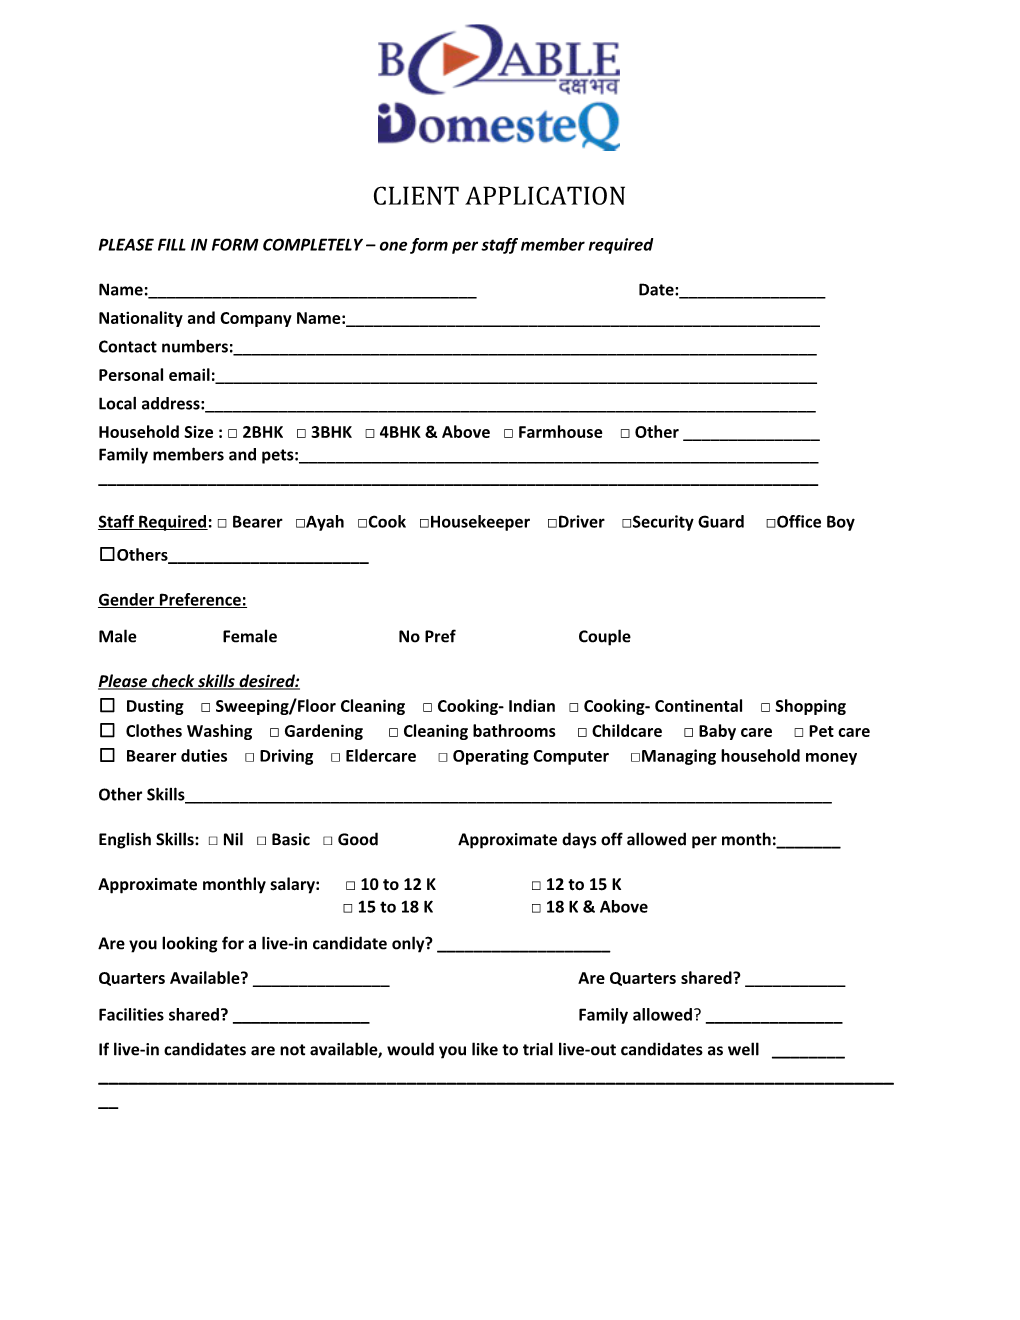 PLEASE FILL in FORM COMPLETELY One Form Per Staff Member Required